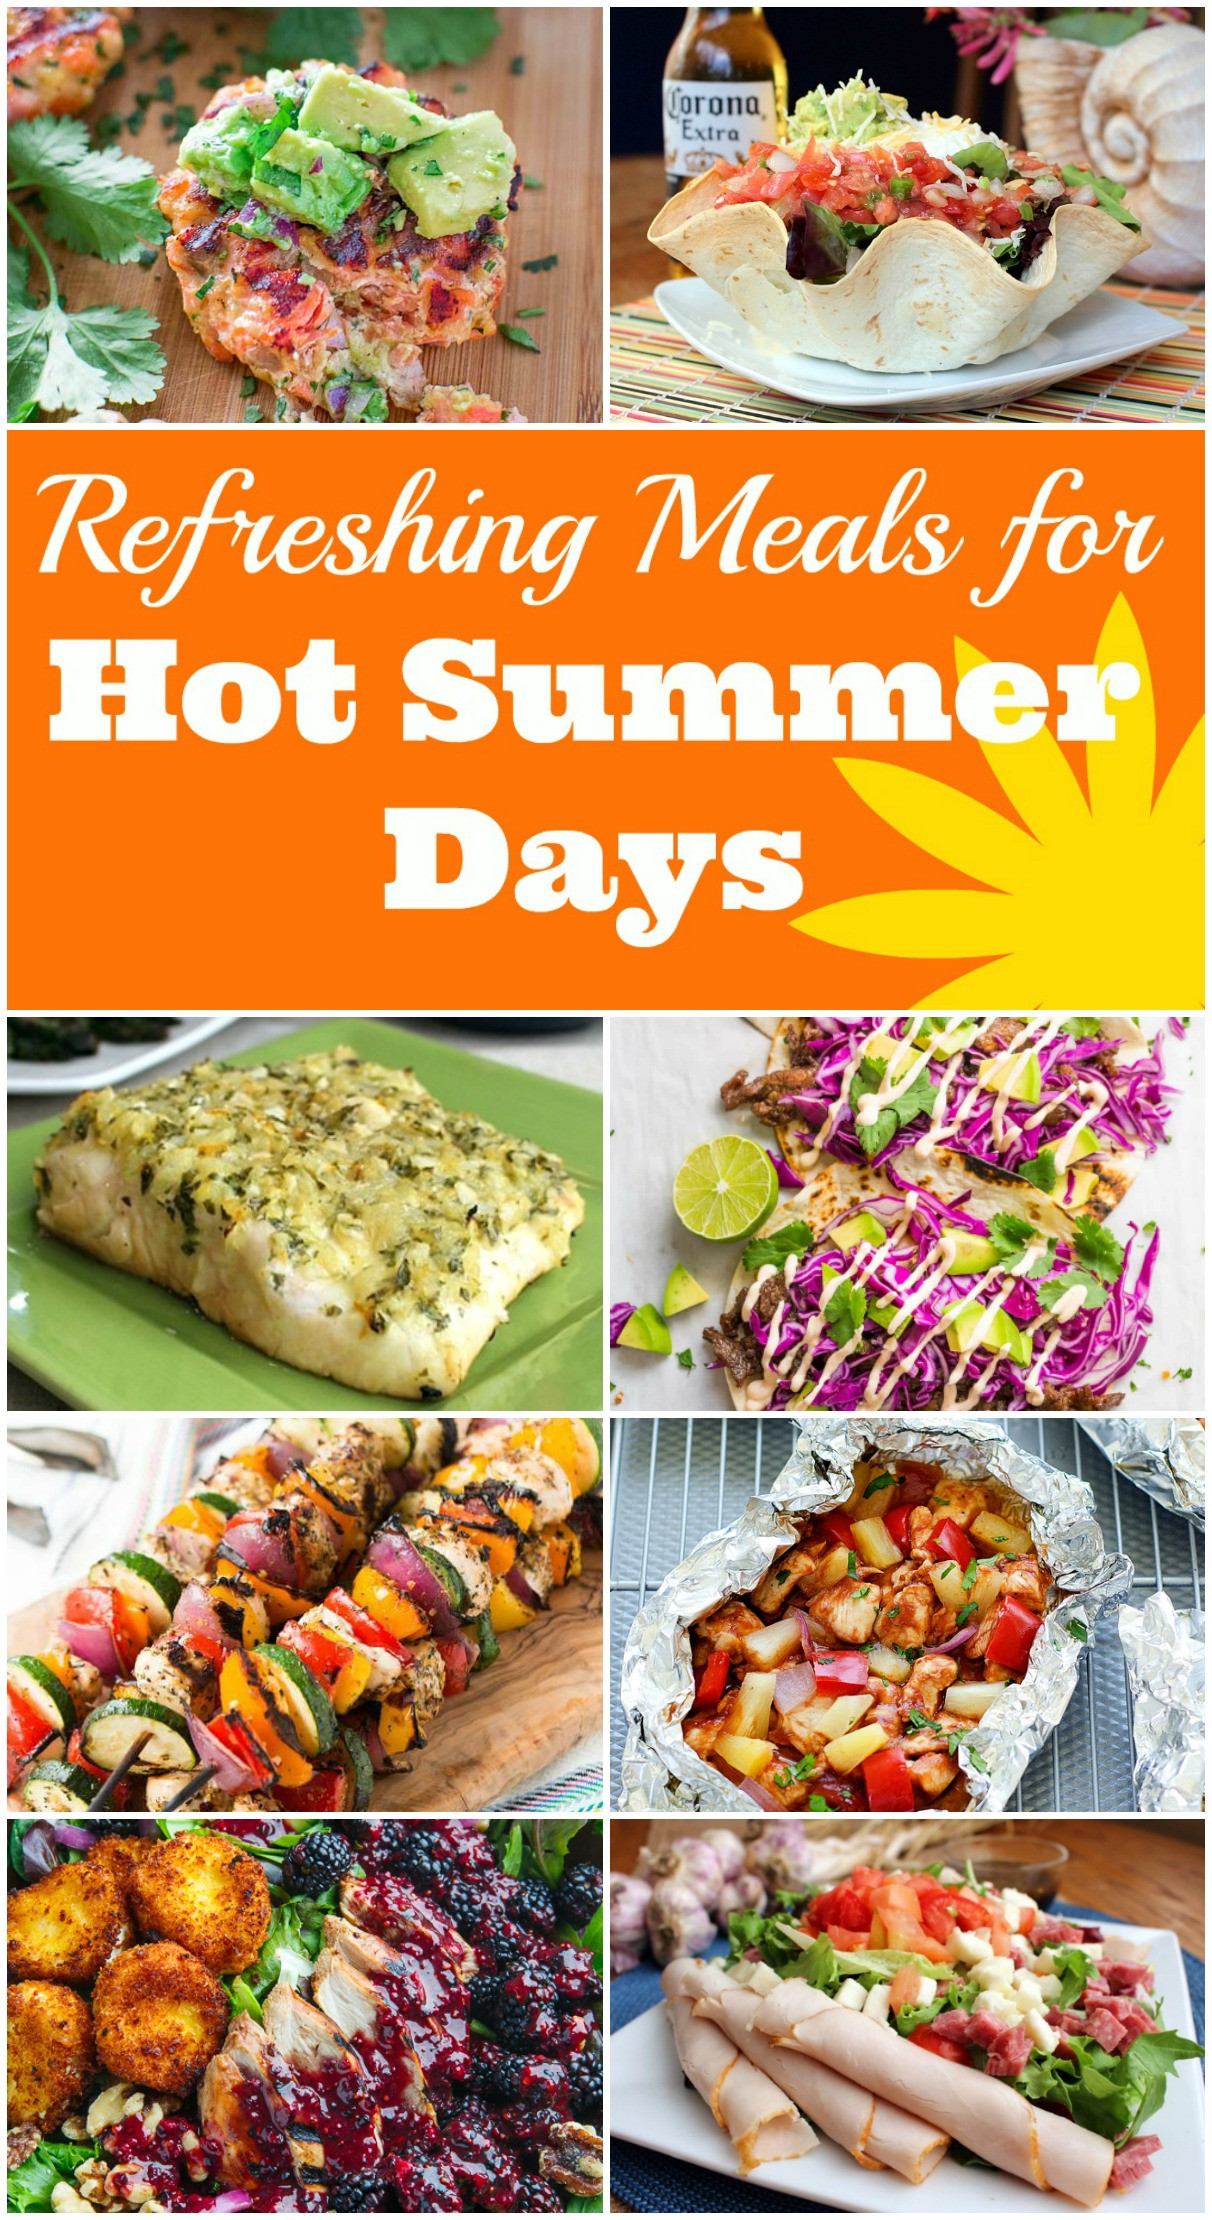 Dinner Ideas For Hot Summer Days
 Refreshing Meals for Hot Summer Days The Ramblings of an